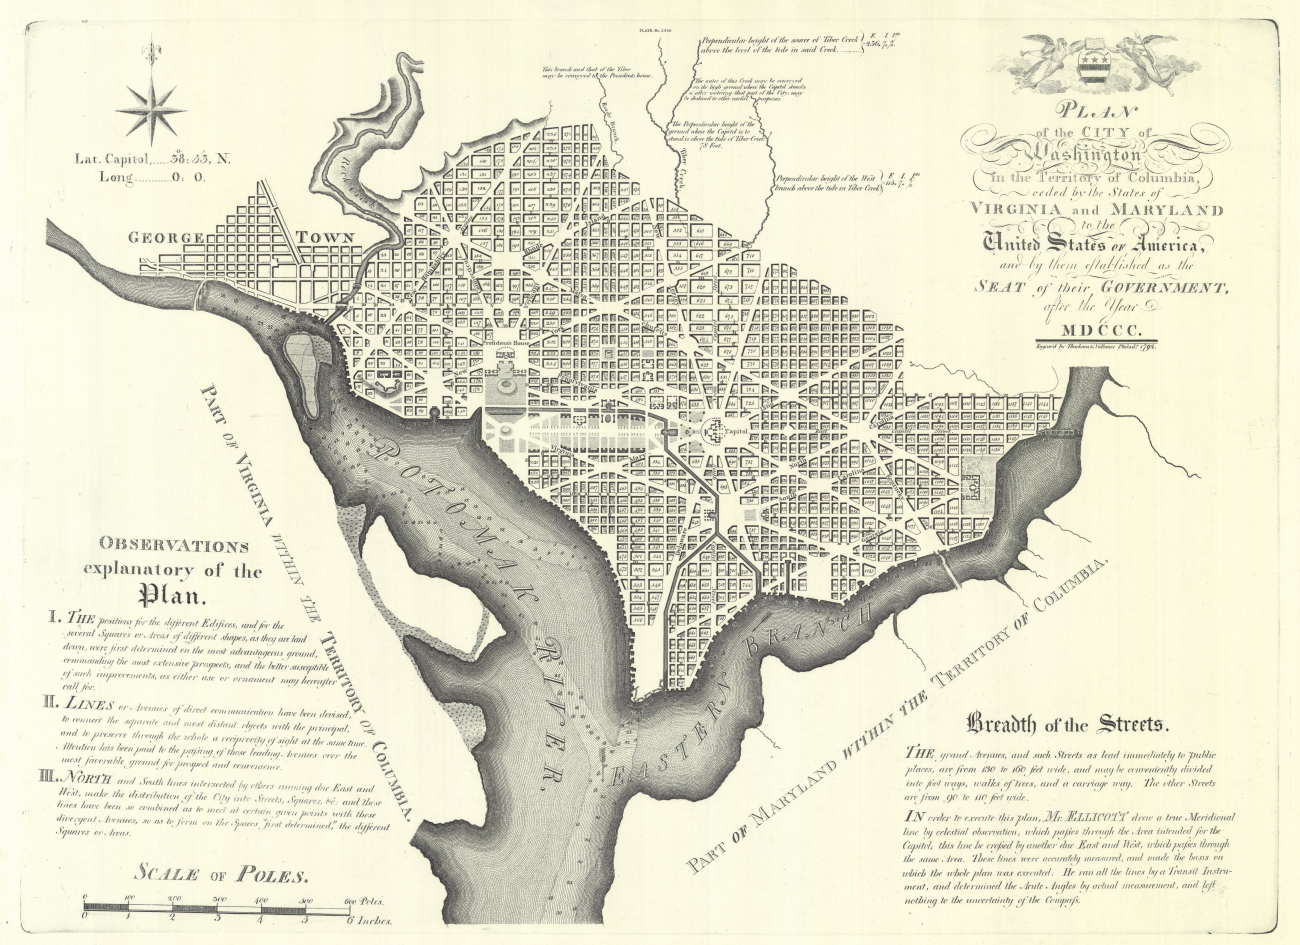 L'Enfant's Plan of the City of Washington in the Territory of Columbia